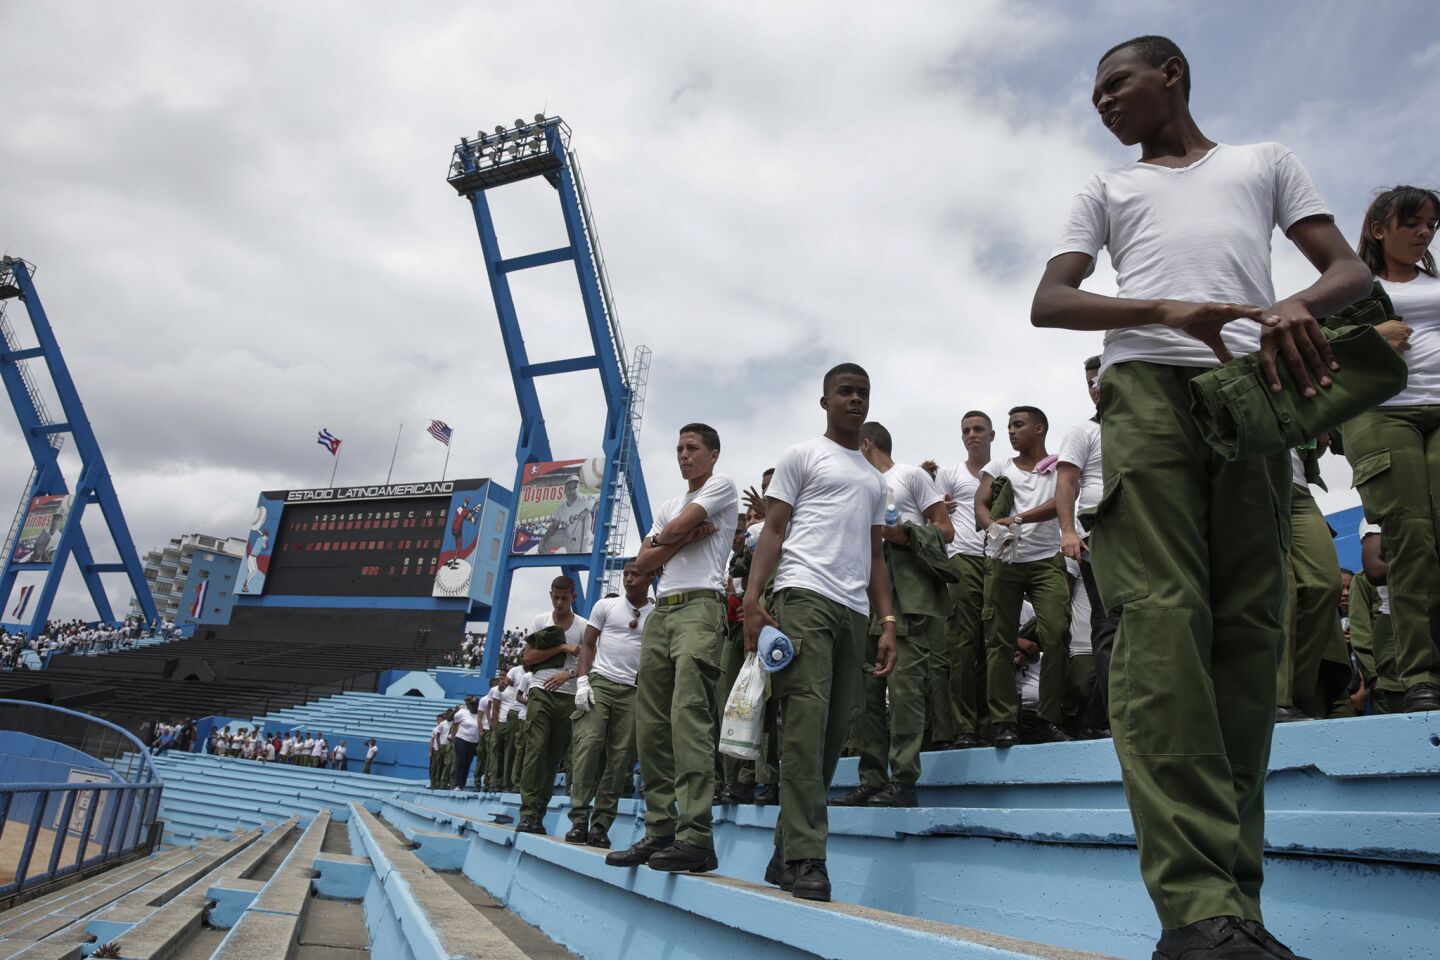 Military school students watch the Cuba National baseball team practice at the Estadio Latinoamericano. The Cuban team will play the Tampa Rays in an exhibition game.